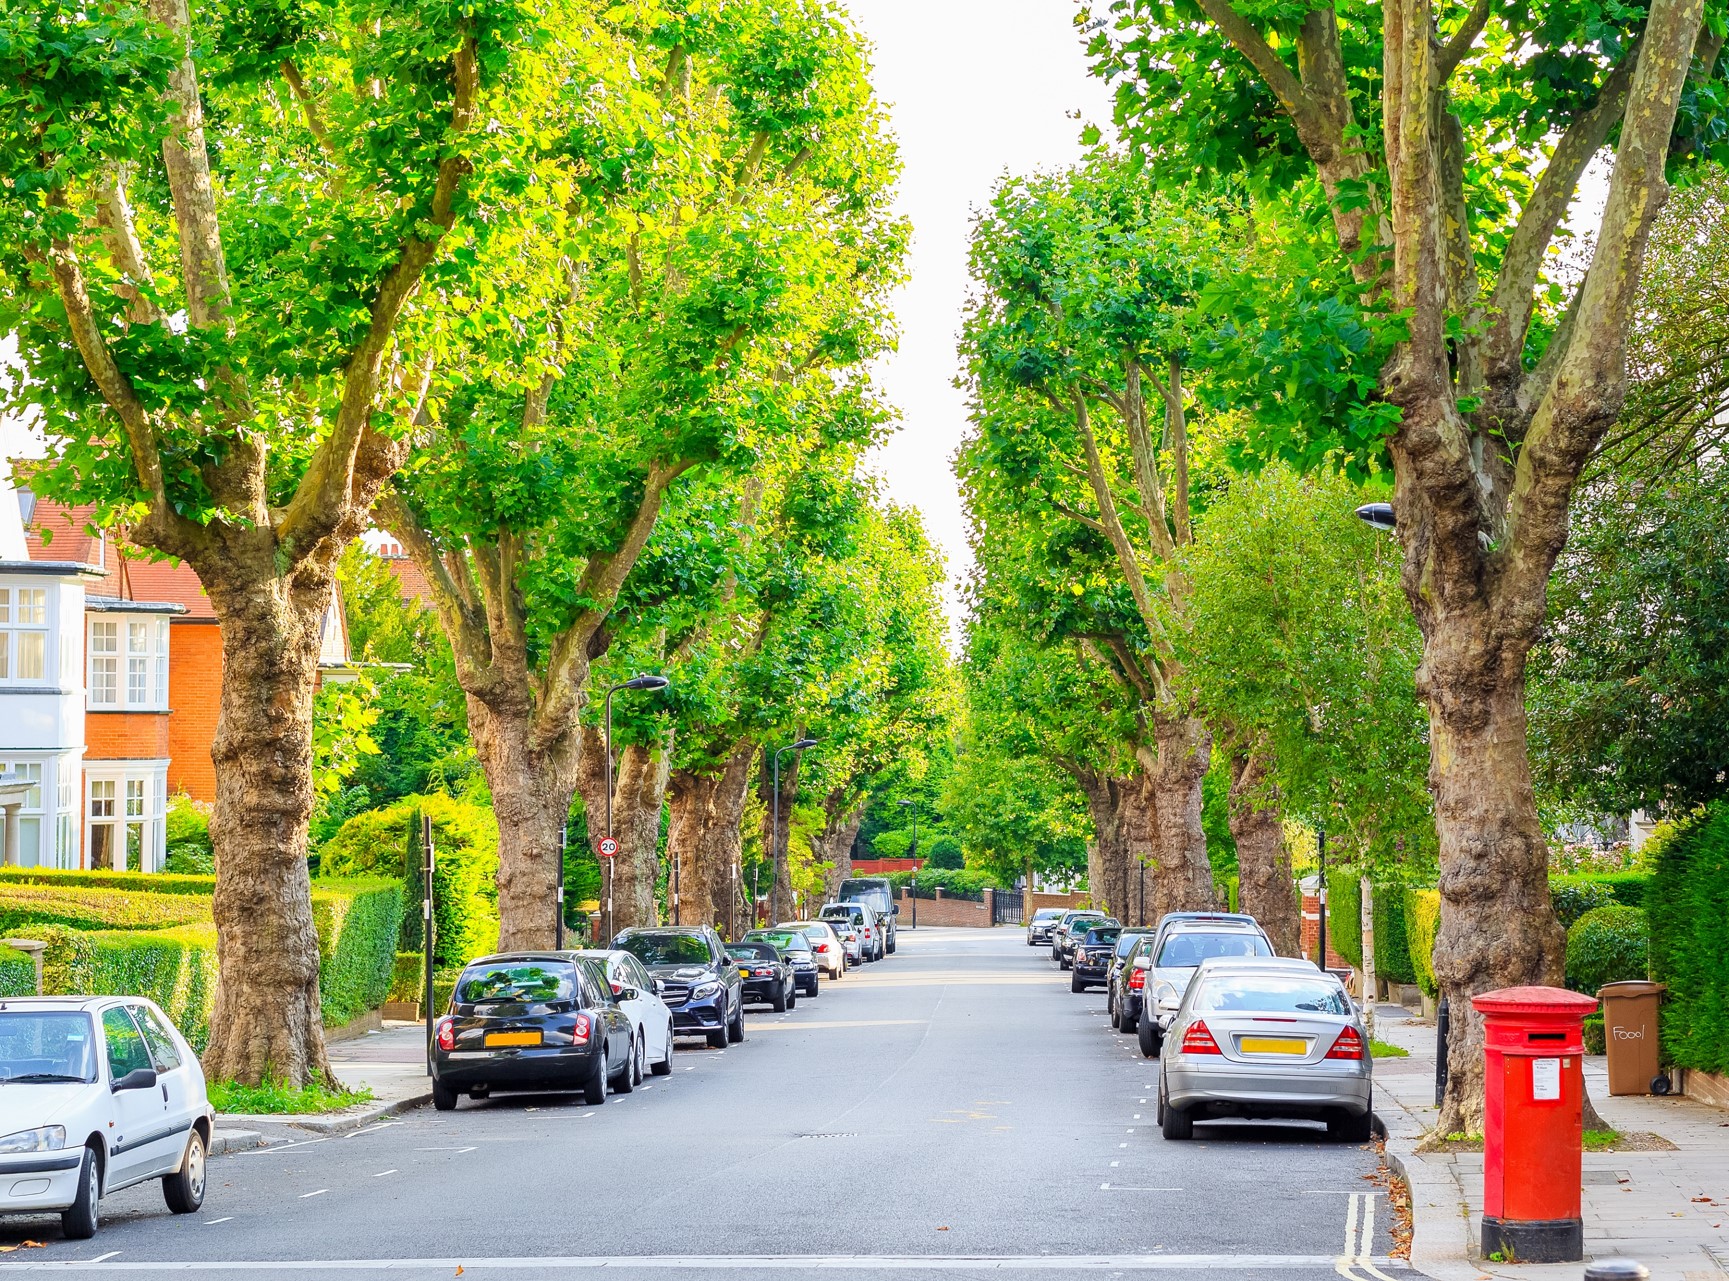 road with trees and parked cars